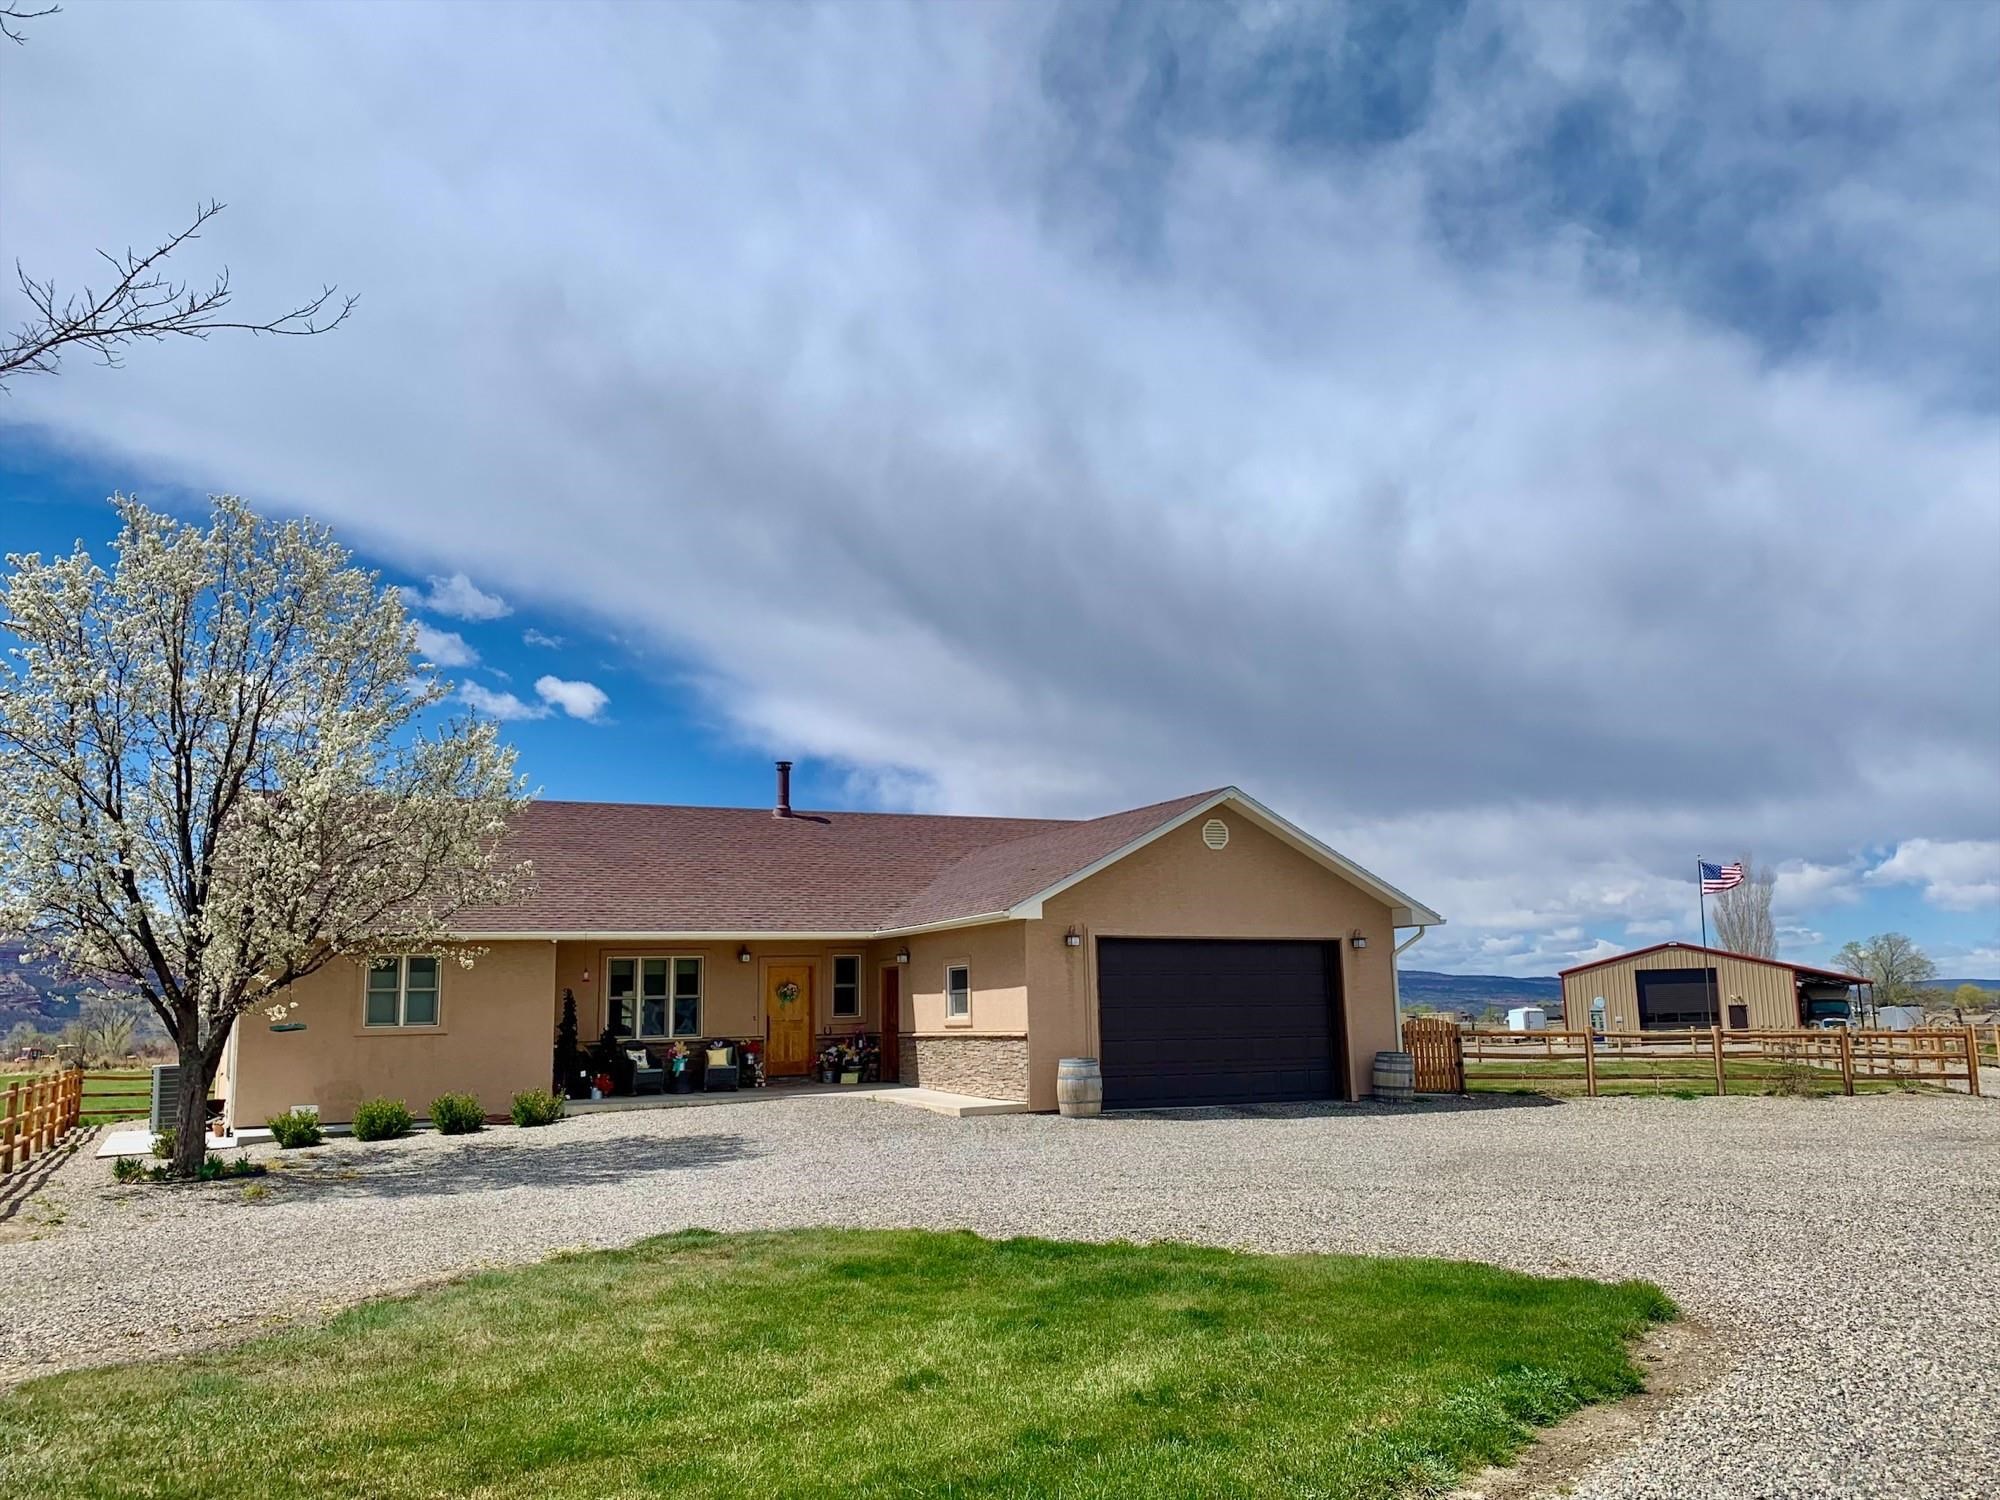 Open concept ranch style home on 9.55 acres with NO HOA!  Approx. 7 acres currently planted in grass pasture. 40x60 heated detached shop with 12x60 RV attached cover, 5 stall 56x26 carport, 2 detached sheds.  Raised garden beds, fully fenced back yard.  Home remodeled in 2018 including paint, flooring, blinds throughout, new appliances, HVAC, fixtures, granite counters, master bath with huge walk in shower.